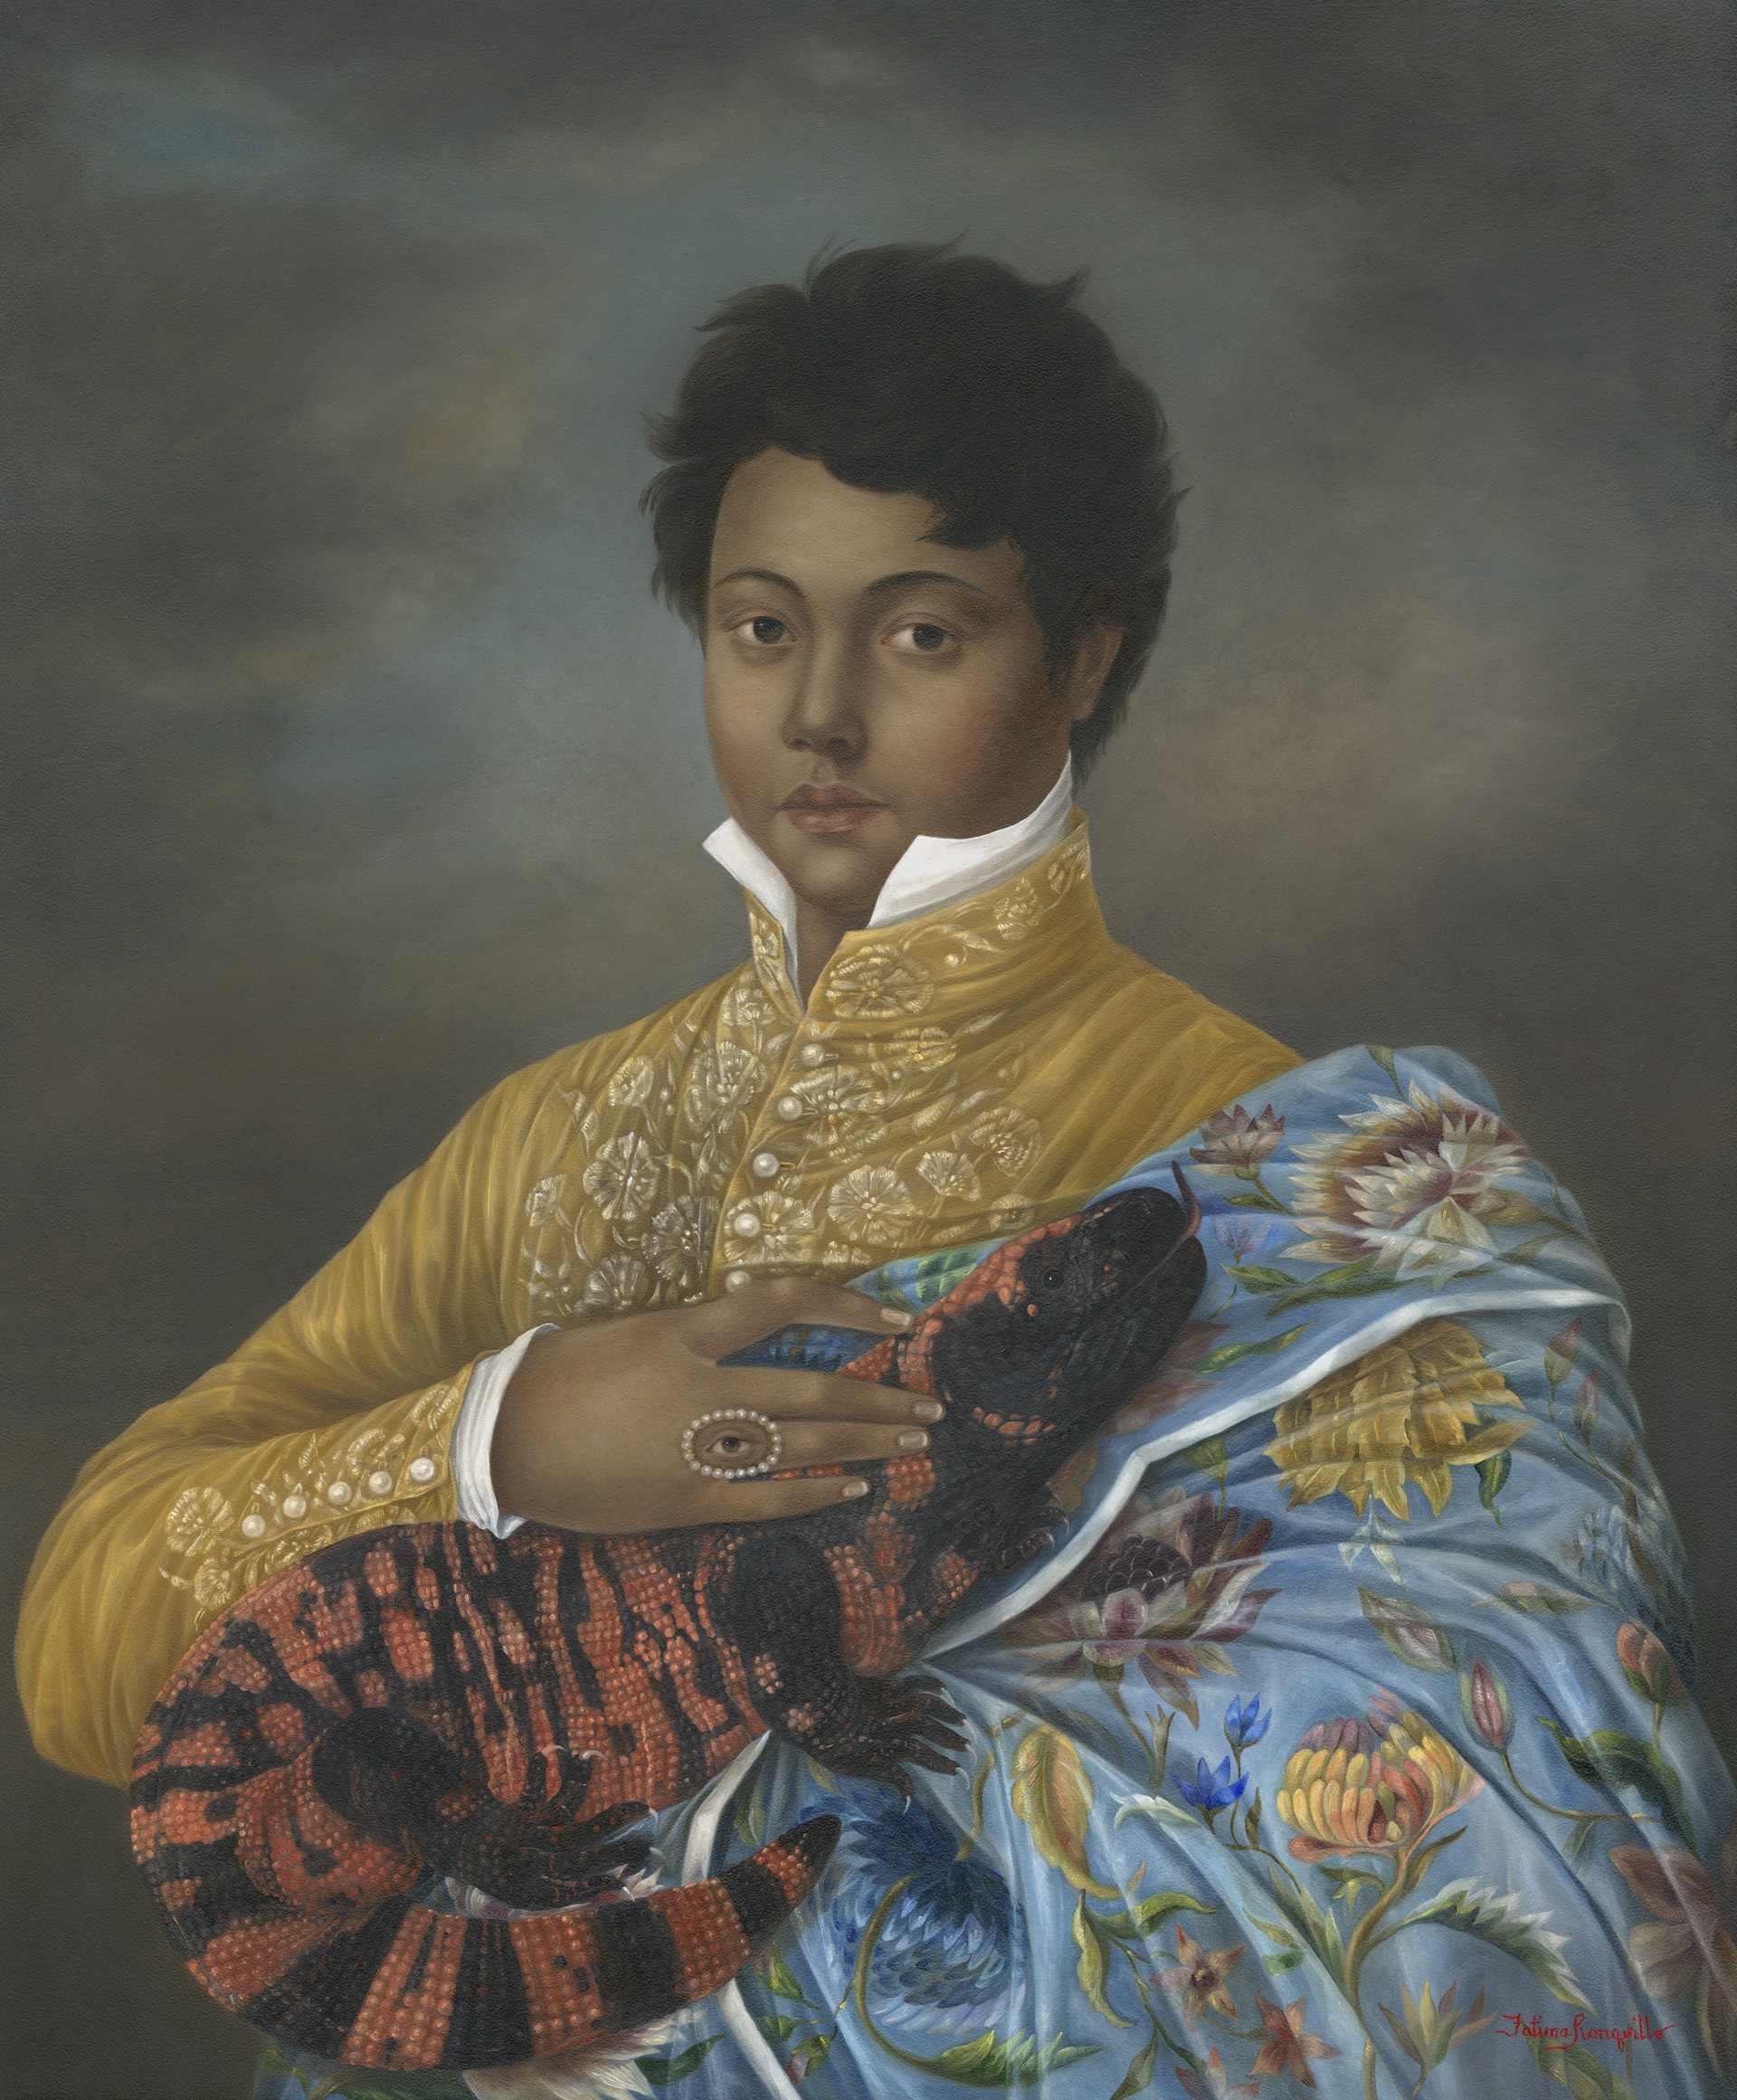 Man with Gila Monster by Fatima Ronquillo